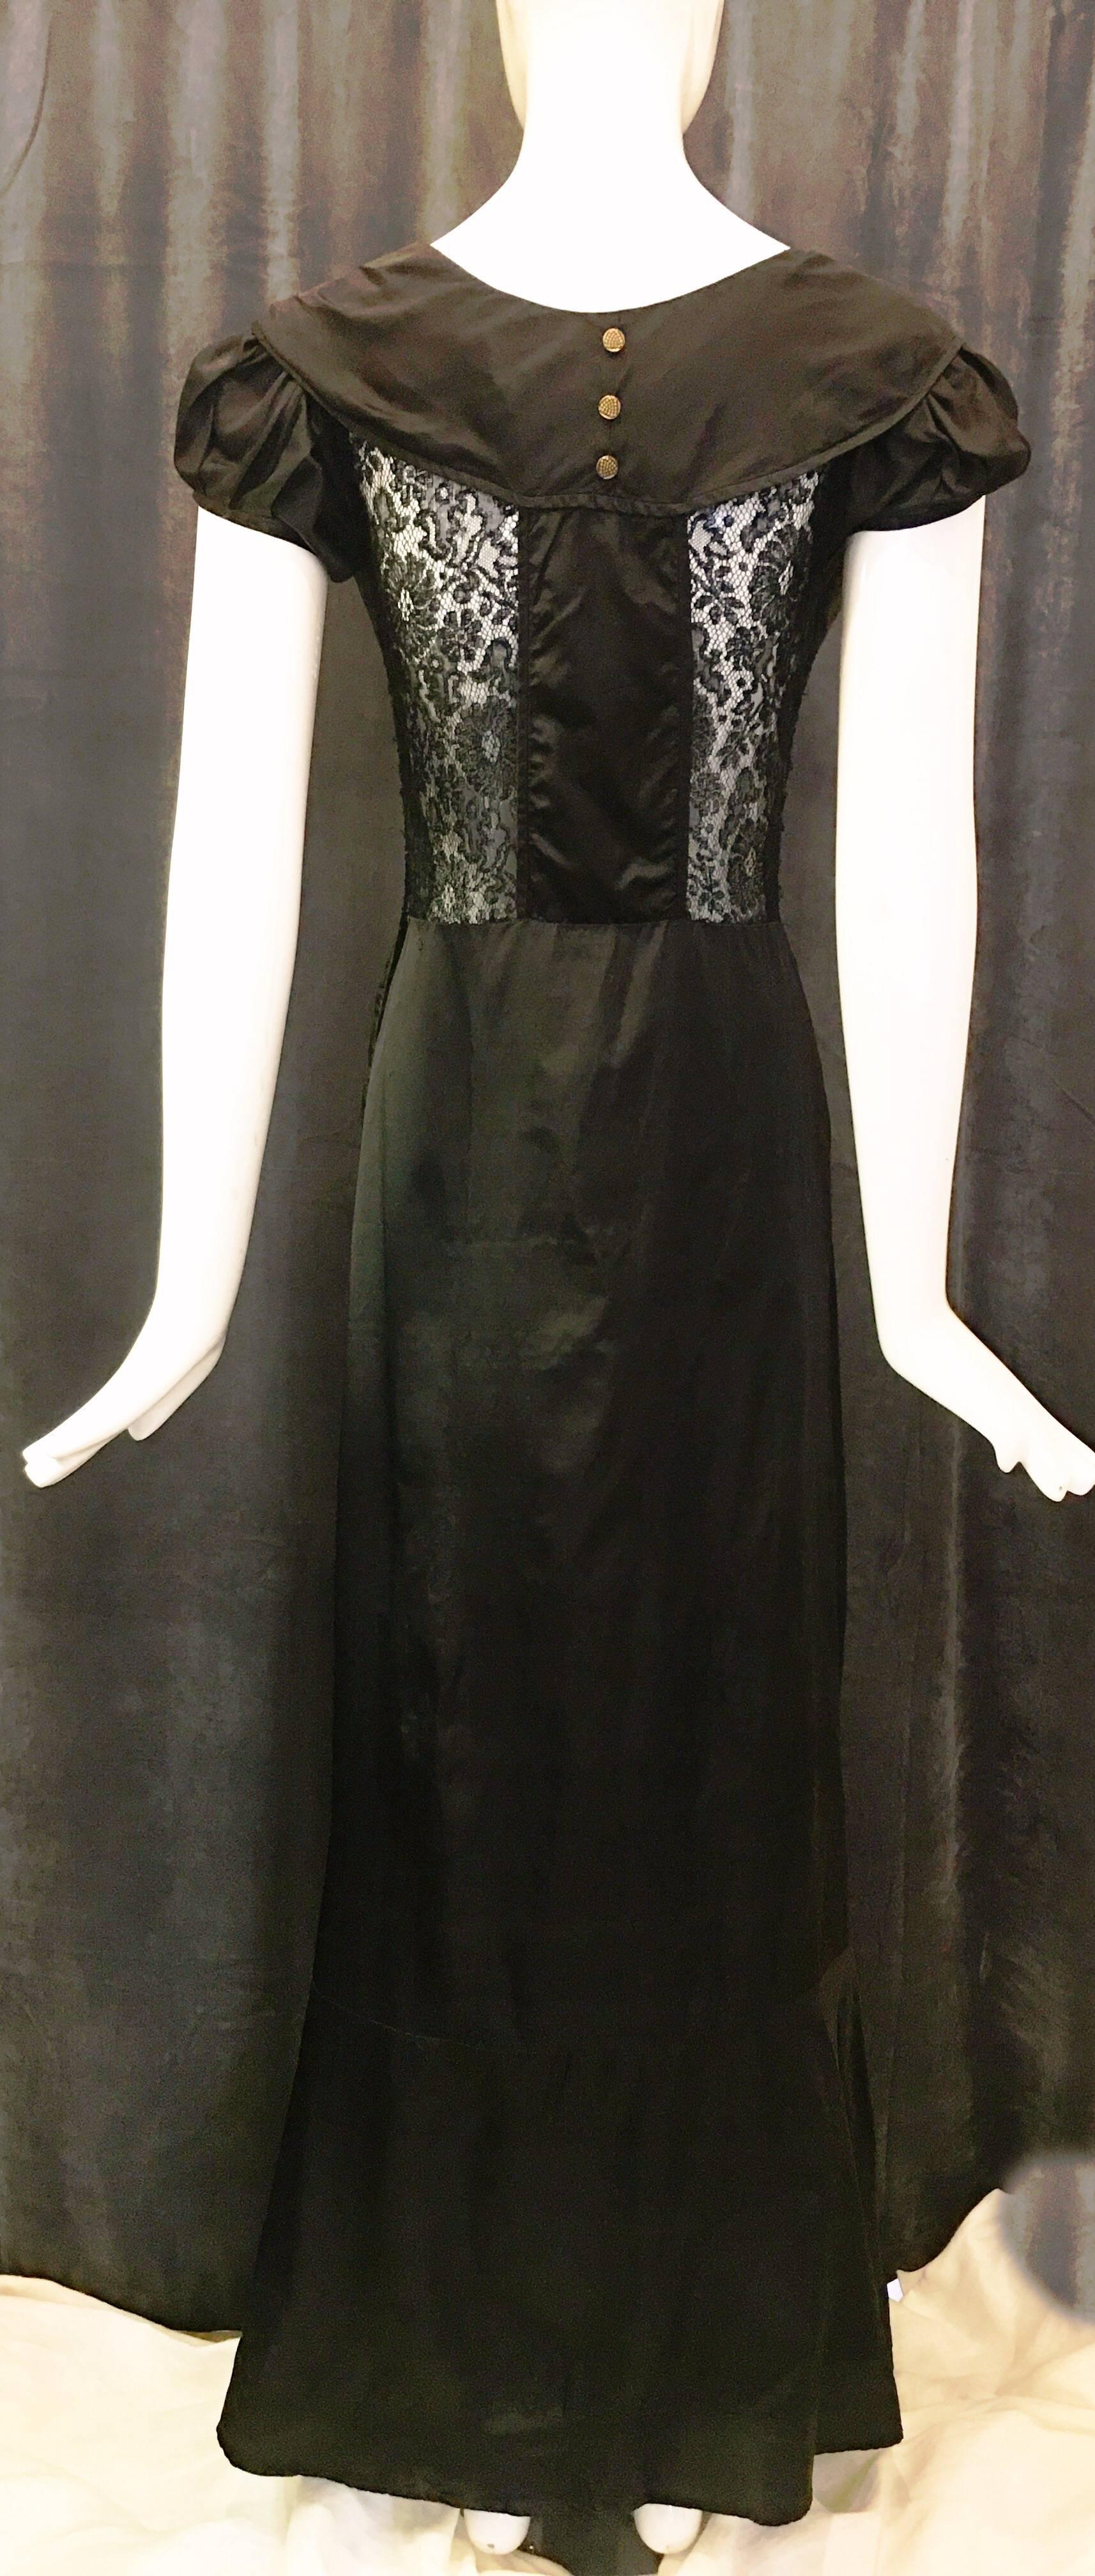 Black Full Length Dress with Lace Paneling, 1950s   In Excellent Condition For Sale In Brooklyn, NY